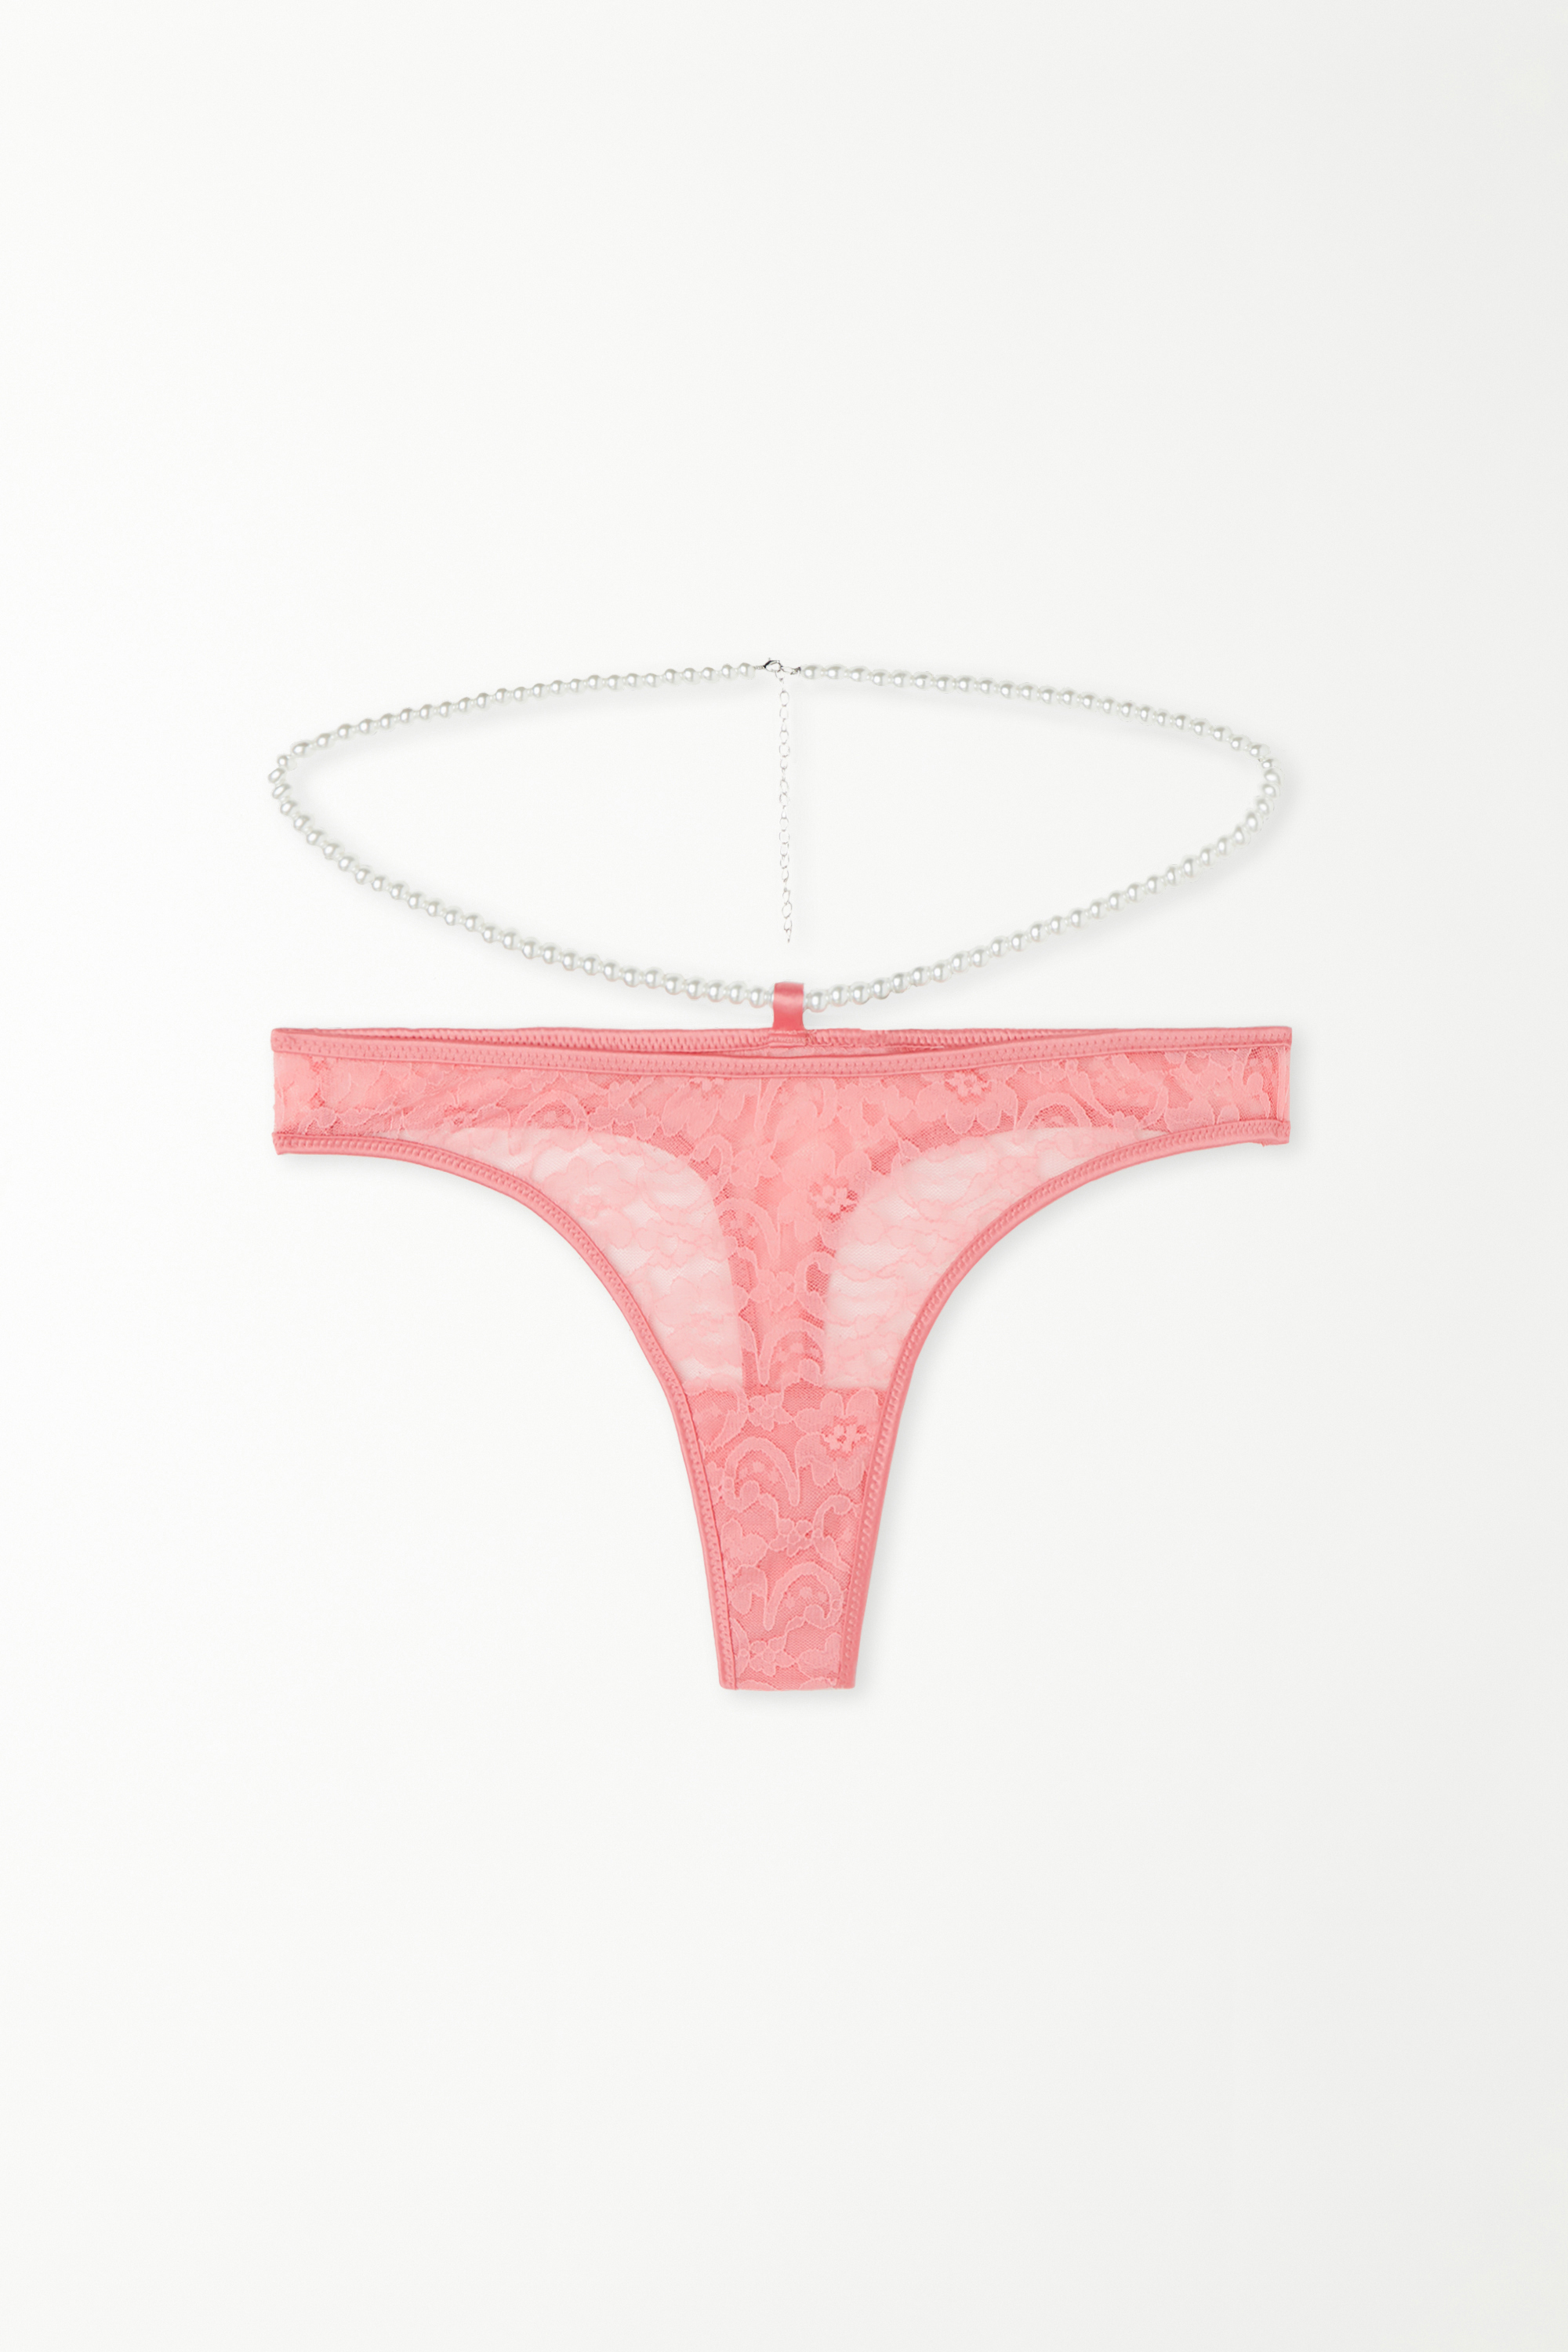 Pearl Pink Lace Thong